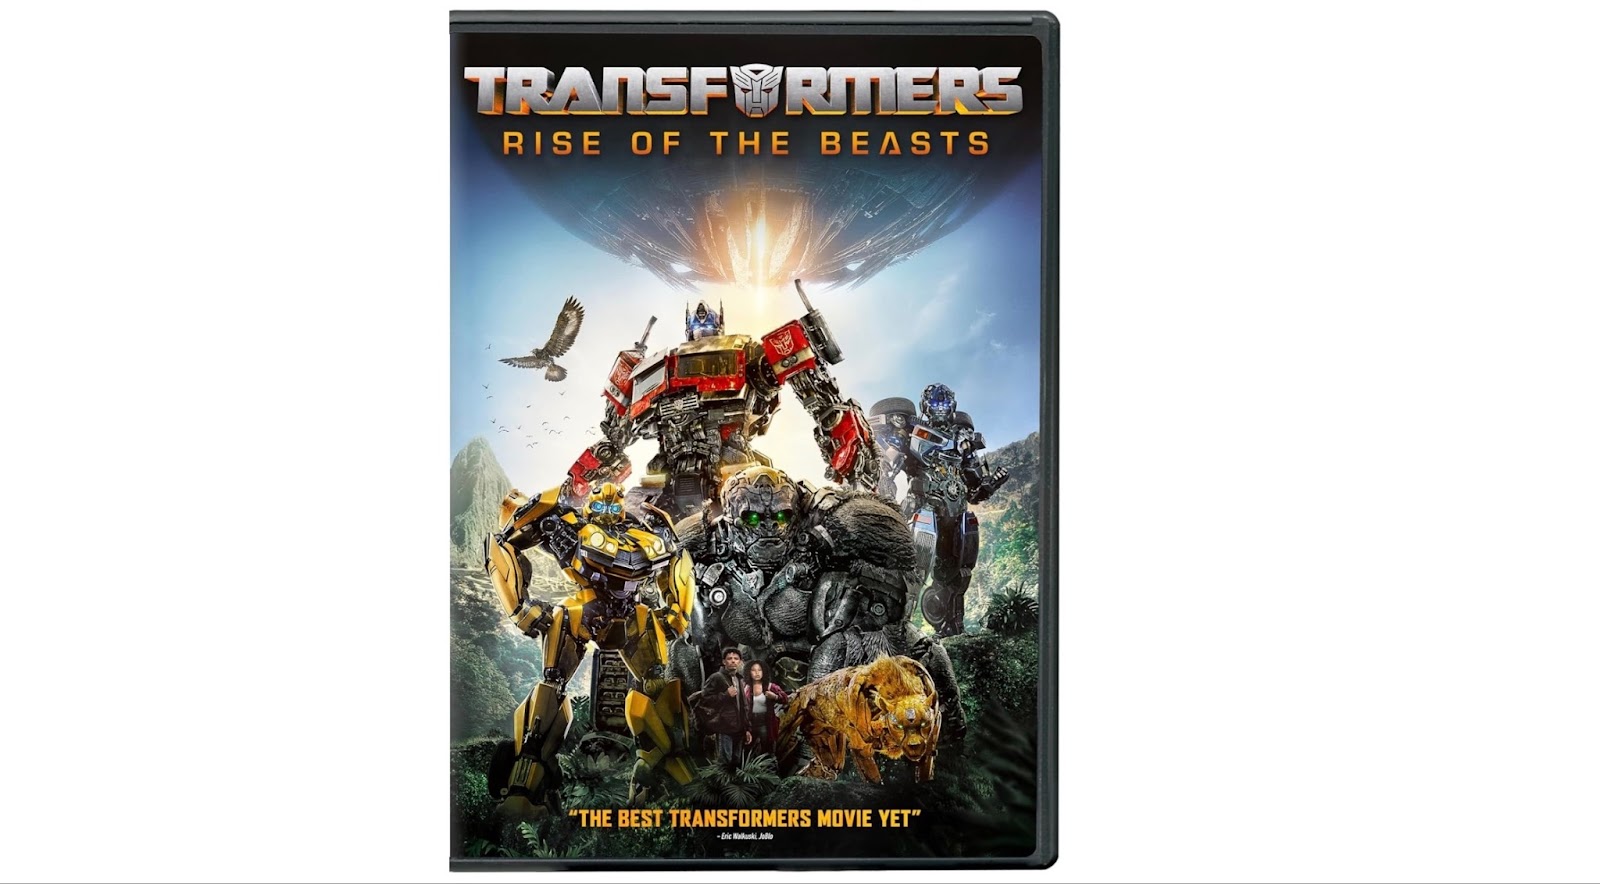 Transformers rise of the beasts movie cover on white background